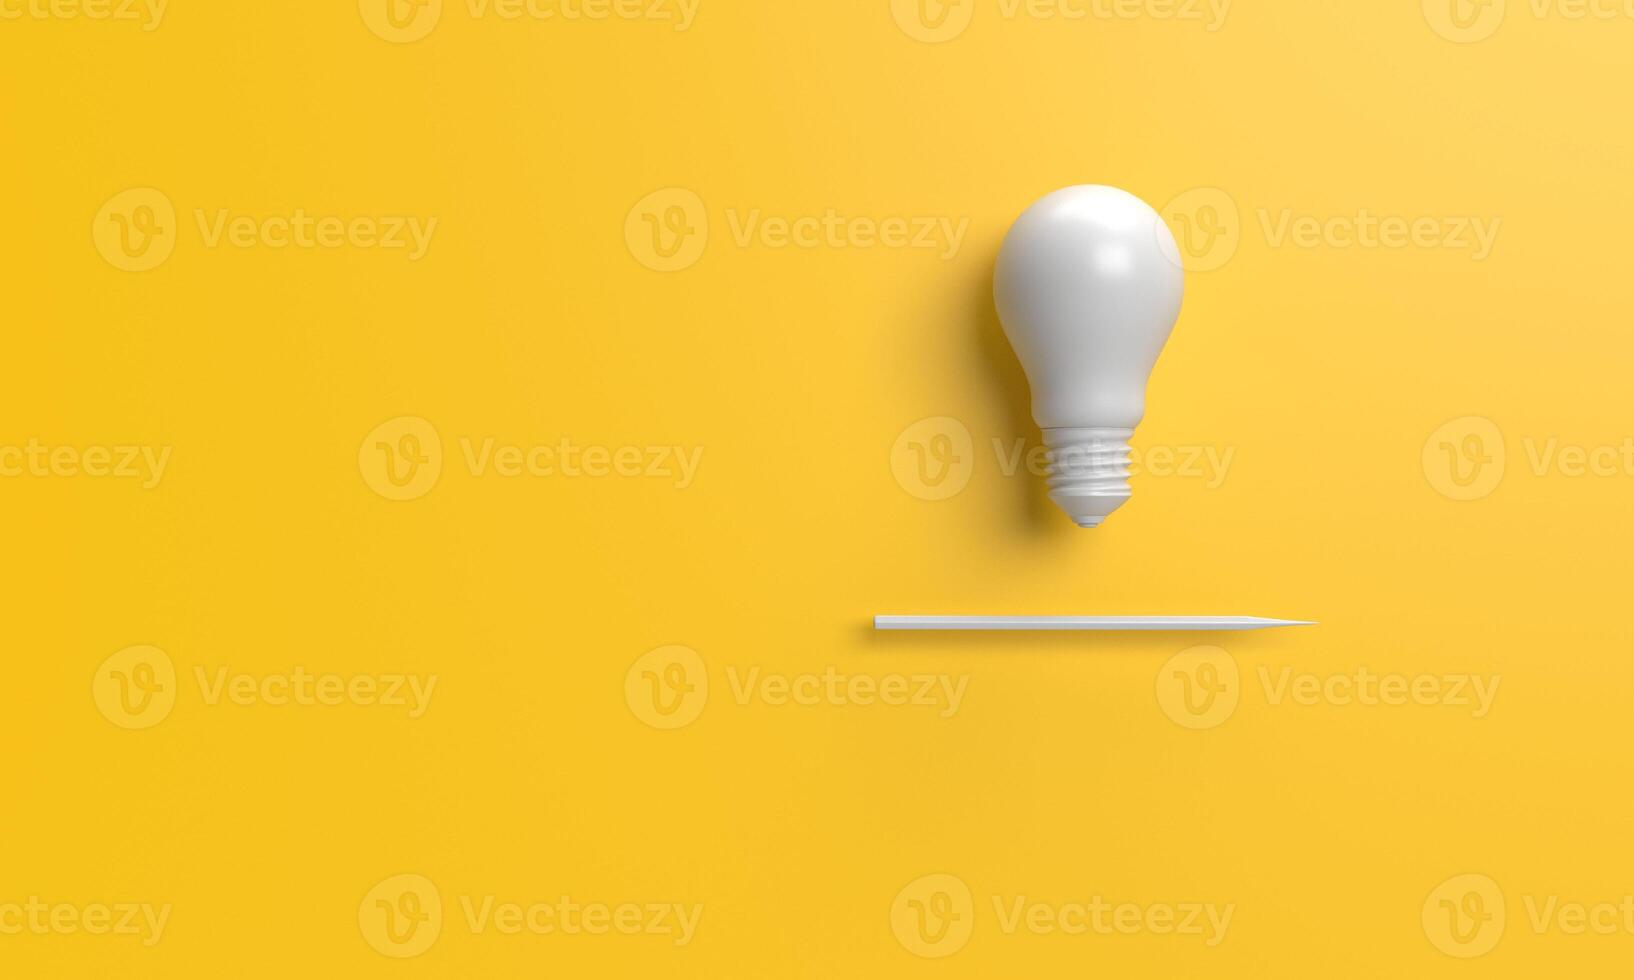 Lamp lightbulb pencil white yellow orange colour background copy space idea strategy innovation inspiration bright education study solution business technology success thinking genius brain.3d render photo